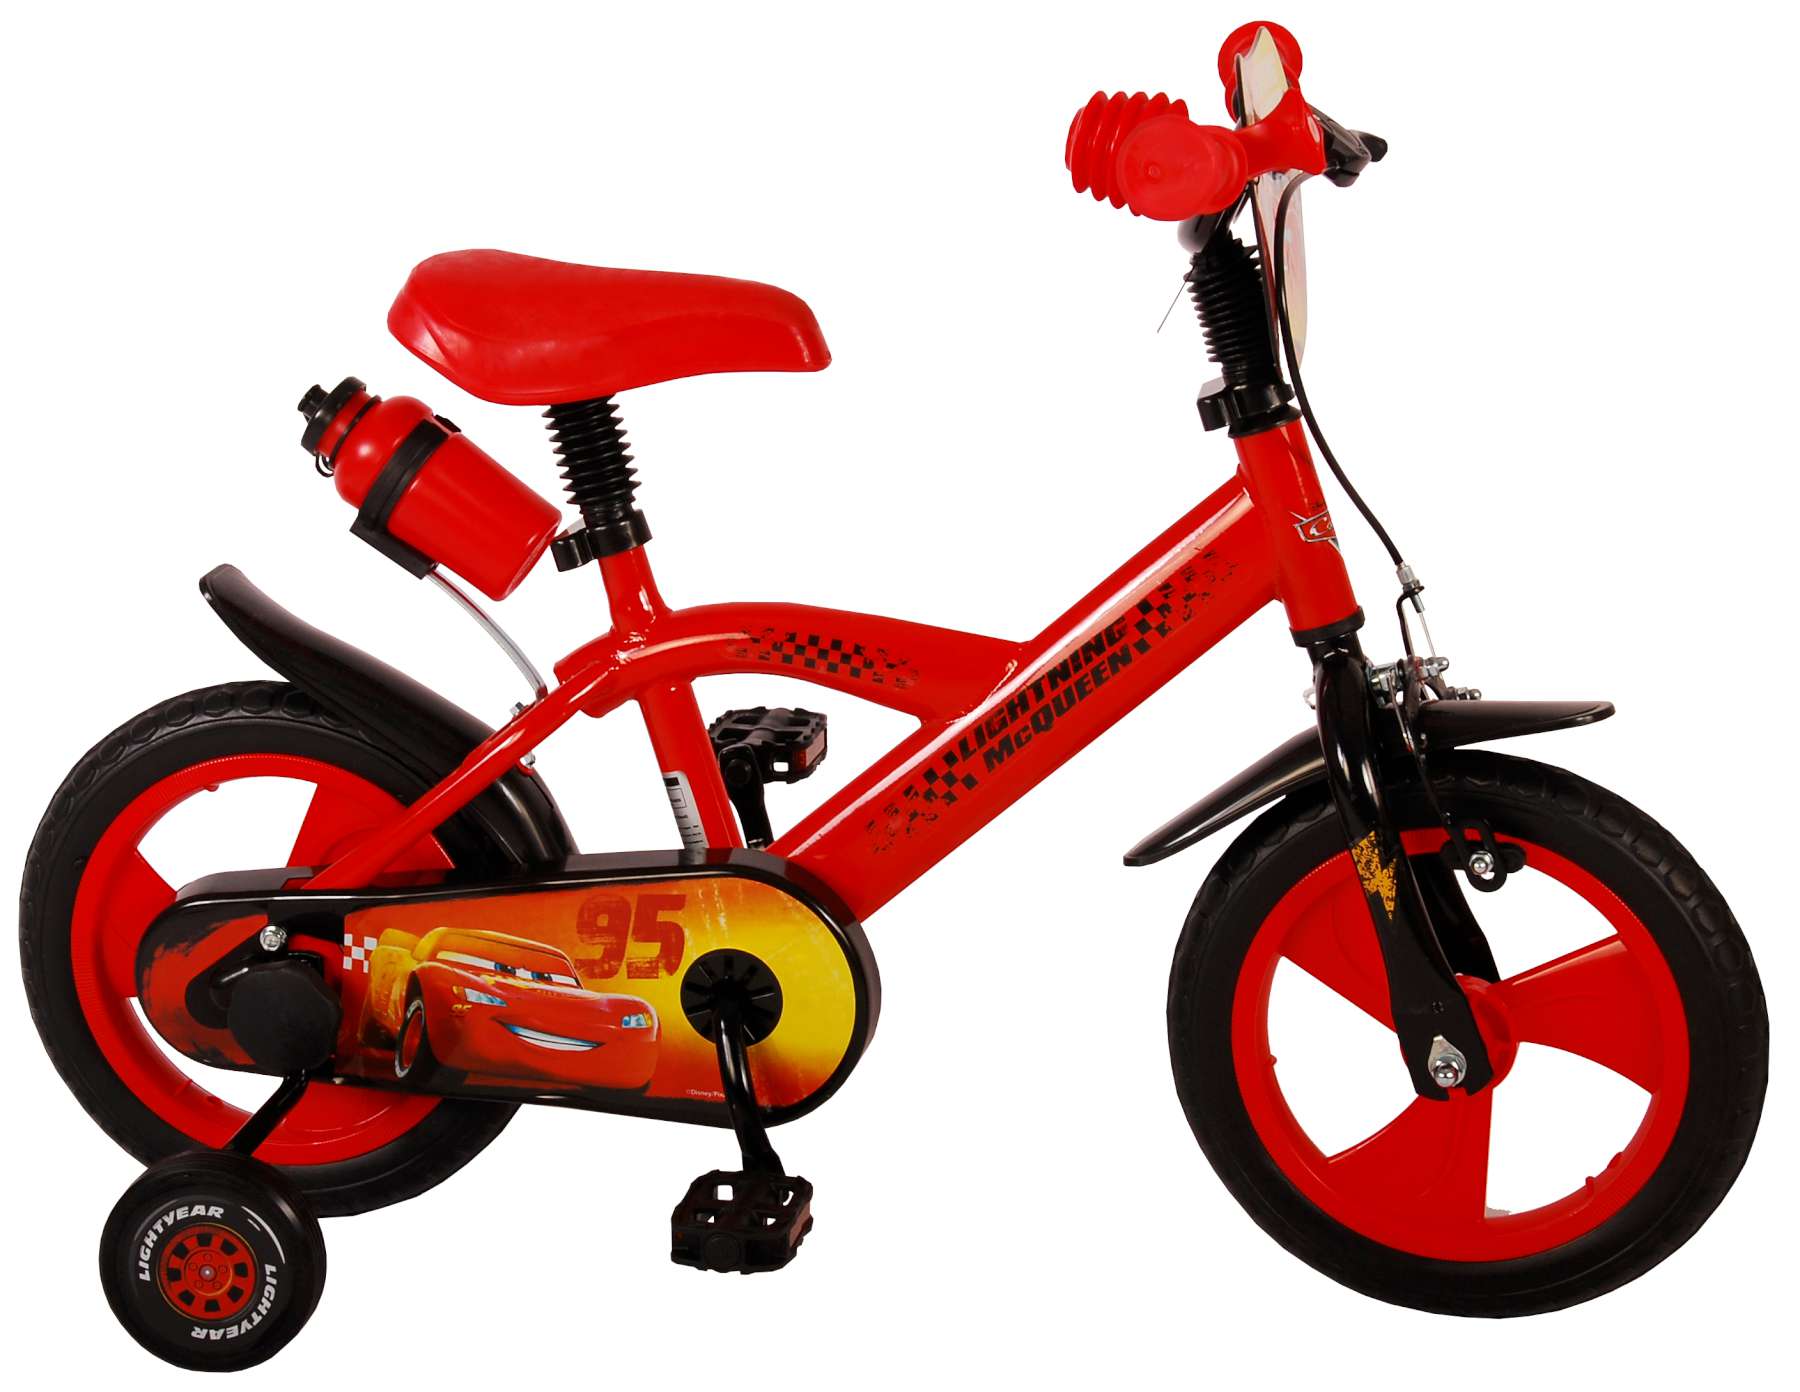 Disney Cars Children's Bicycle - - 12 - Red - Reverse pedal system